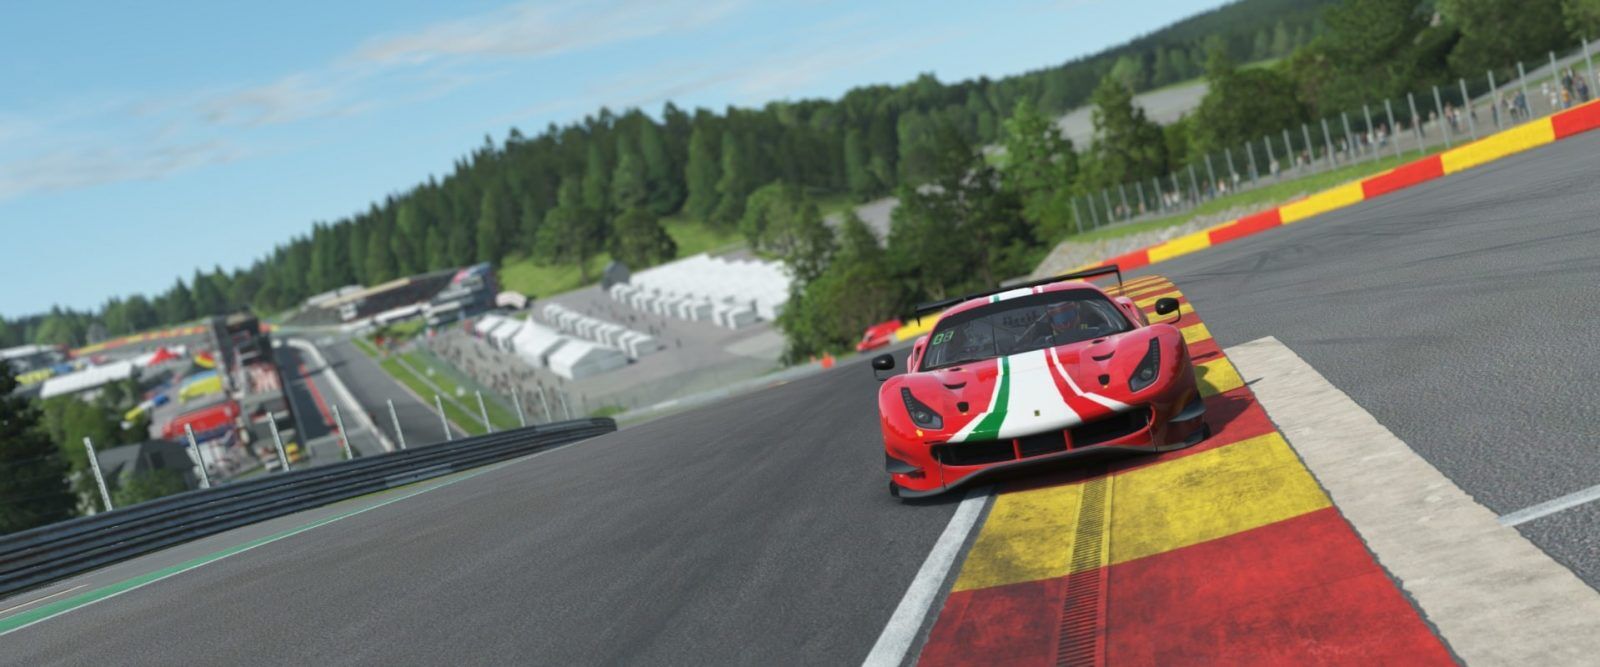 Spa-Francorchamps now available for rFactor 2